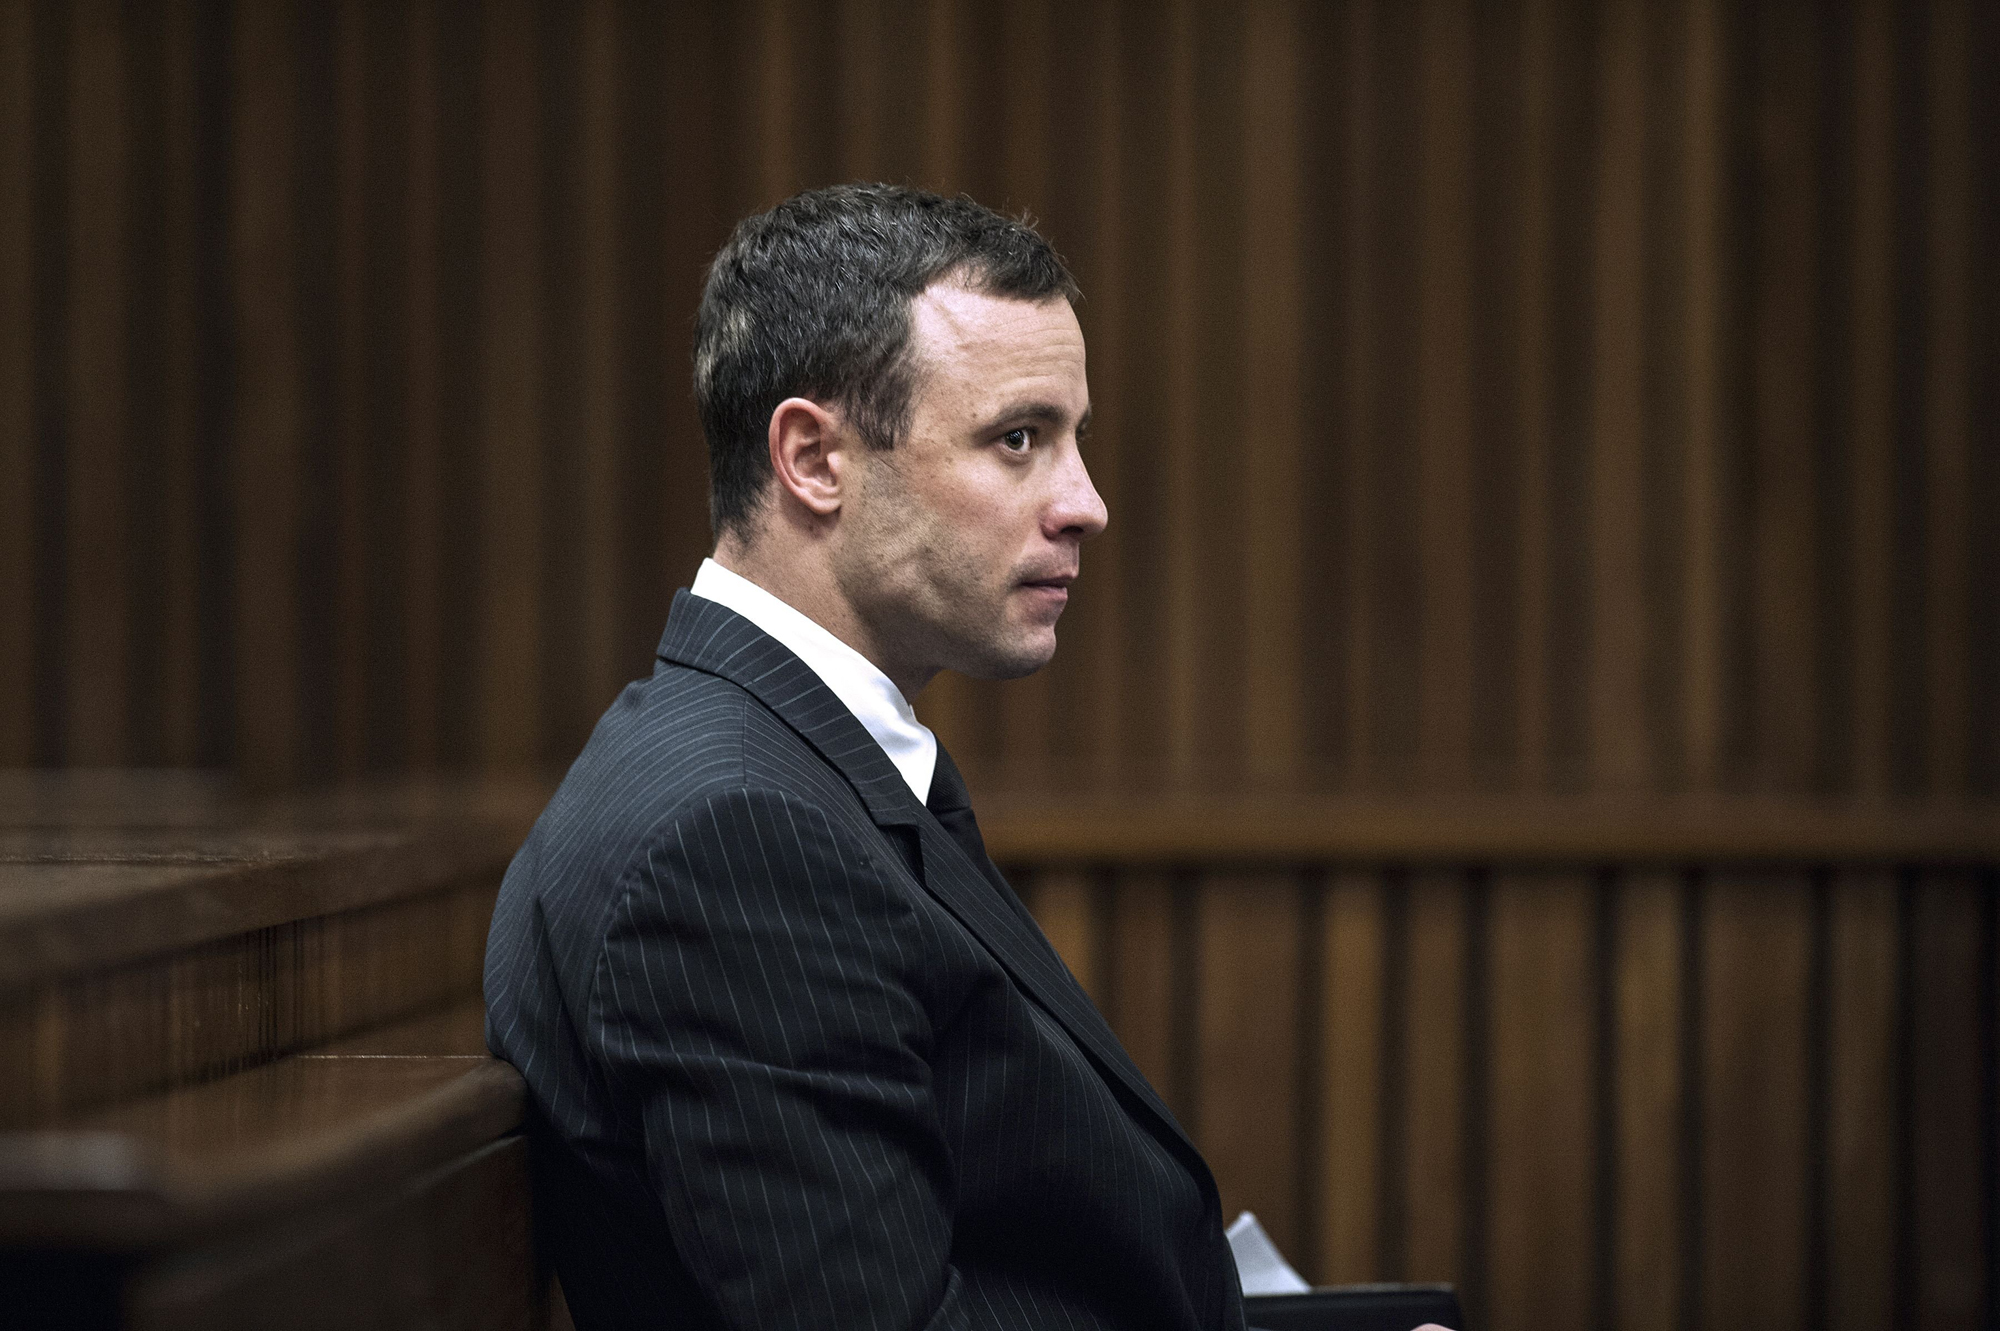 Paralympian Oscar Pistorius sits in the dock during his murder trial at the High Court in Pretoria, on July 2, 2014. (Gianluigi Guercia—AFP/Getty Images)